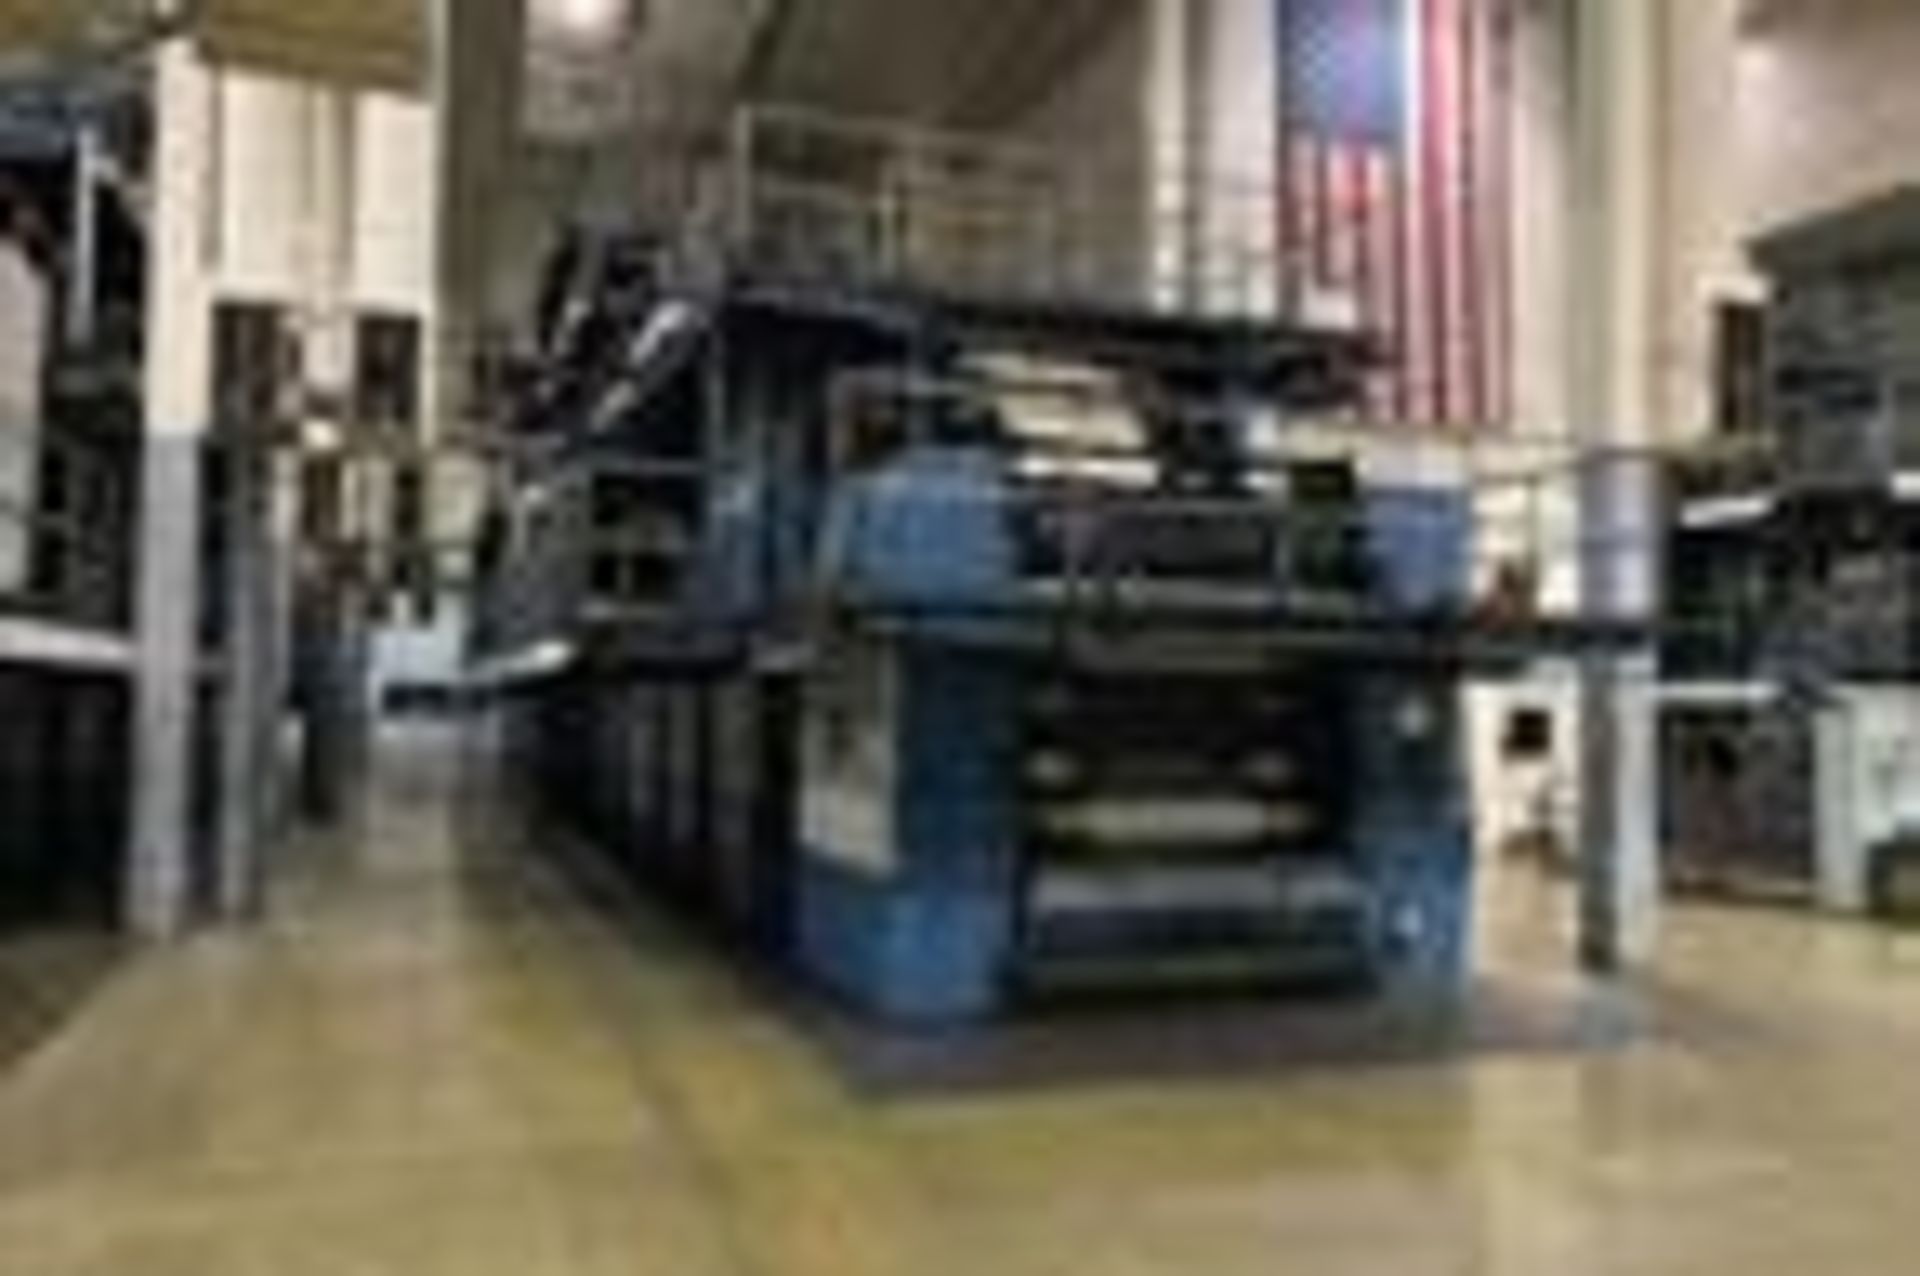 (4) TKS M-72 ELEVEN UNIT OFFSET PRINTING PRESSES W/TOP COLOR 6000 - SOME COMPONENTS REMOVED, (68) - Image 11 of 24